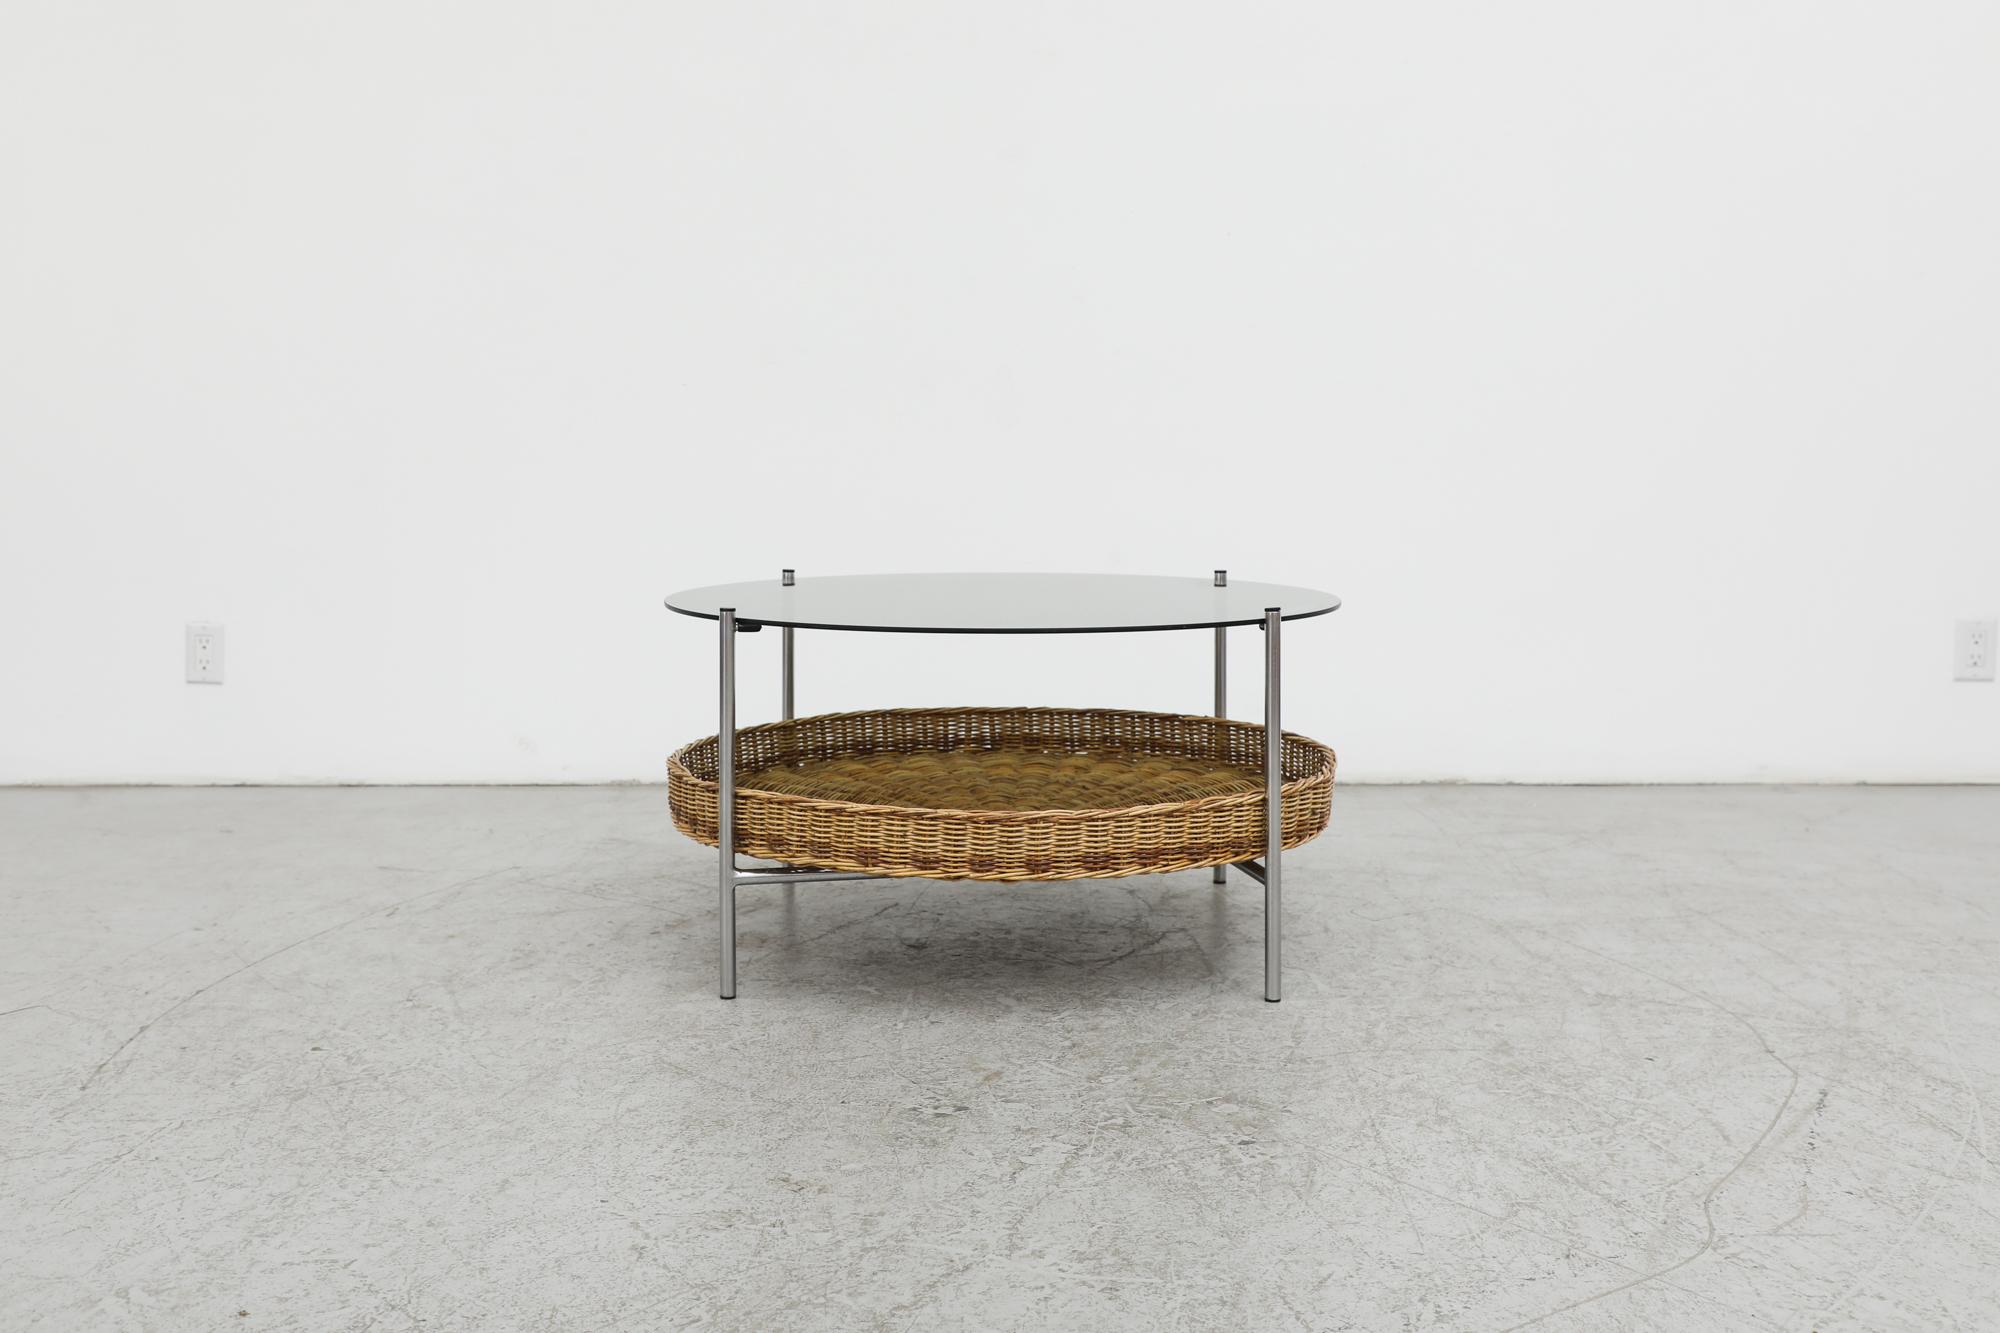 Low, mid-century side table by Dirk van Sliedregt for the Gebr. Jonkers furniture manufacturing company. The design features a round, smoked glass top and four matte chrome legs. The legs are crosswise connected by two steel tubes, on which a round